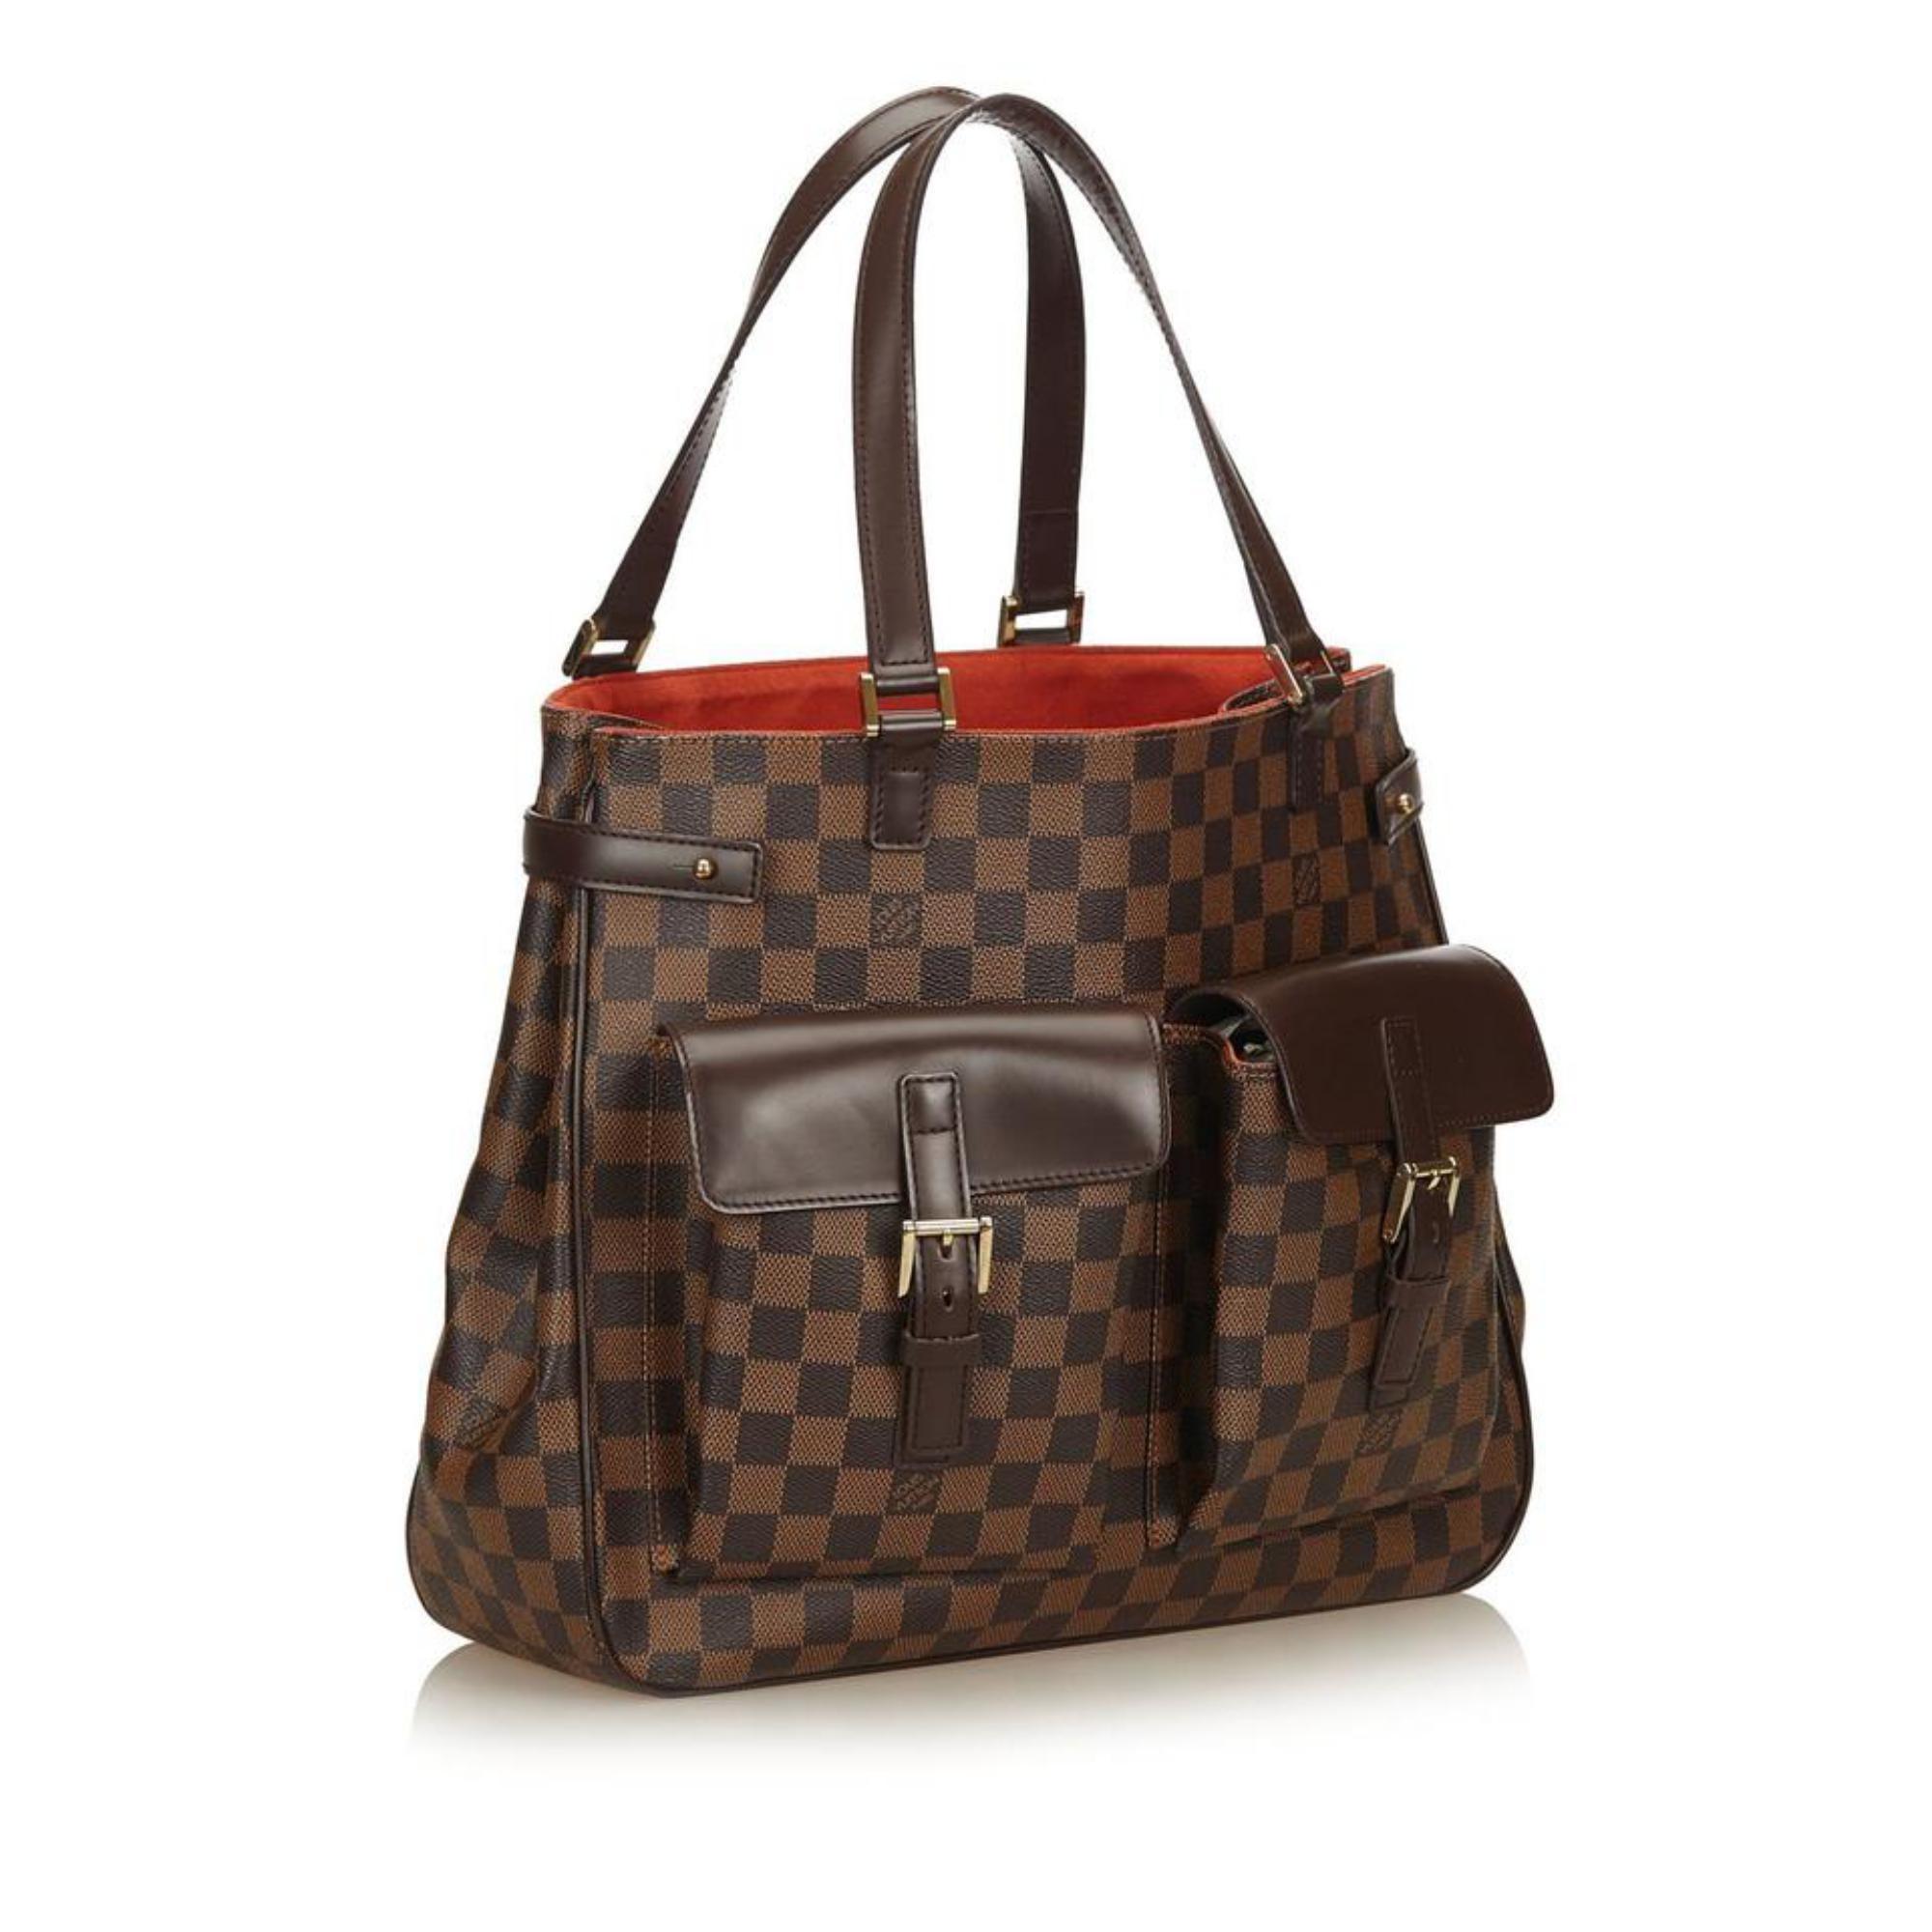 Authentic Louis Vuitton Damier Uzes Tote Bag N51128 LV
BrandLouis Vuitton
Made inFrance
Serial Number / Date Code MB0075
MaterialDamier Canvas
ColorBrown
StyleTote Bag
Size(cm)W35 x H28.5 x D11cm / Handle Drop 20cm(Approx)
Size(inch)W13.8 x H11.2 x